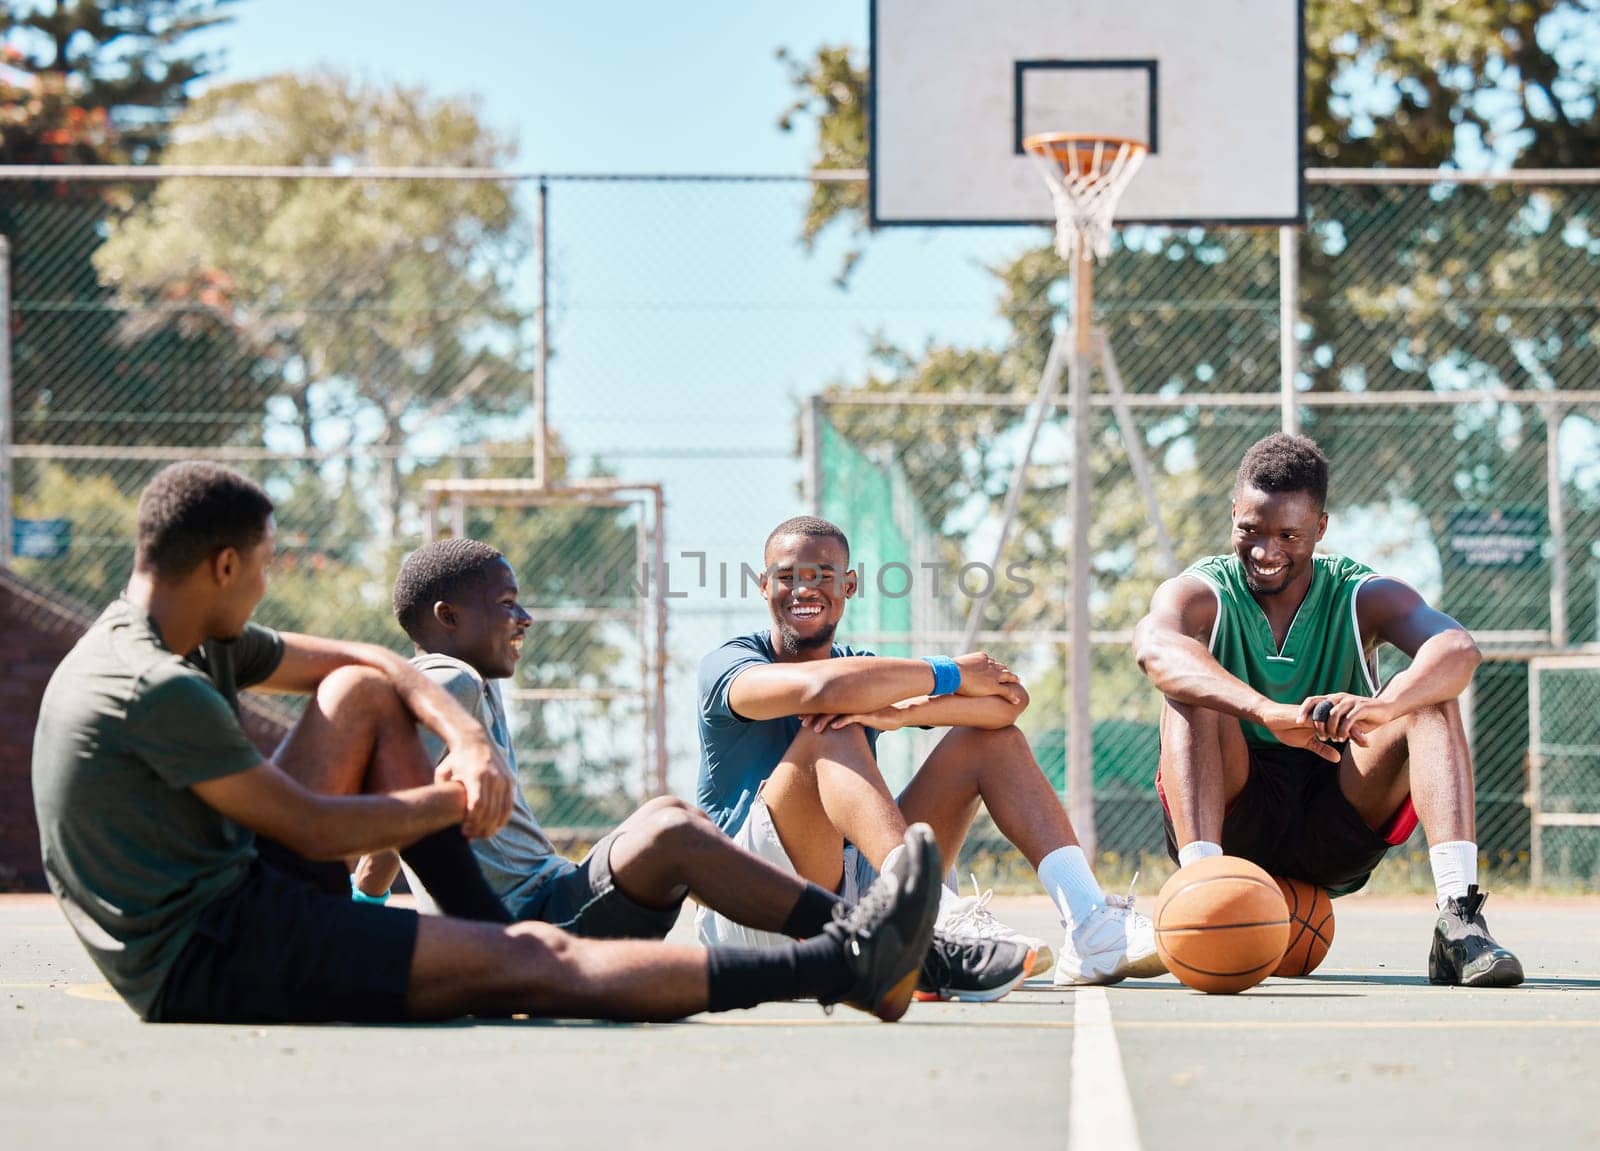 Basketball court, friends and men, break and team sports, social conversation and relax in community playground. Basketball players, rest and black people together after game, team training and match.